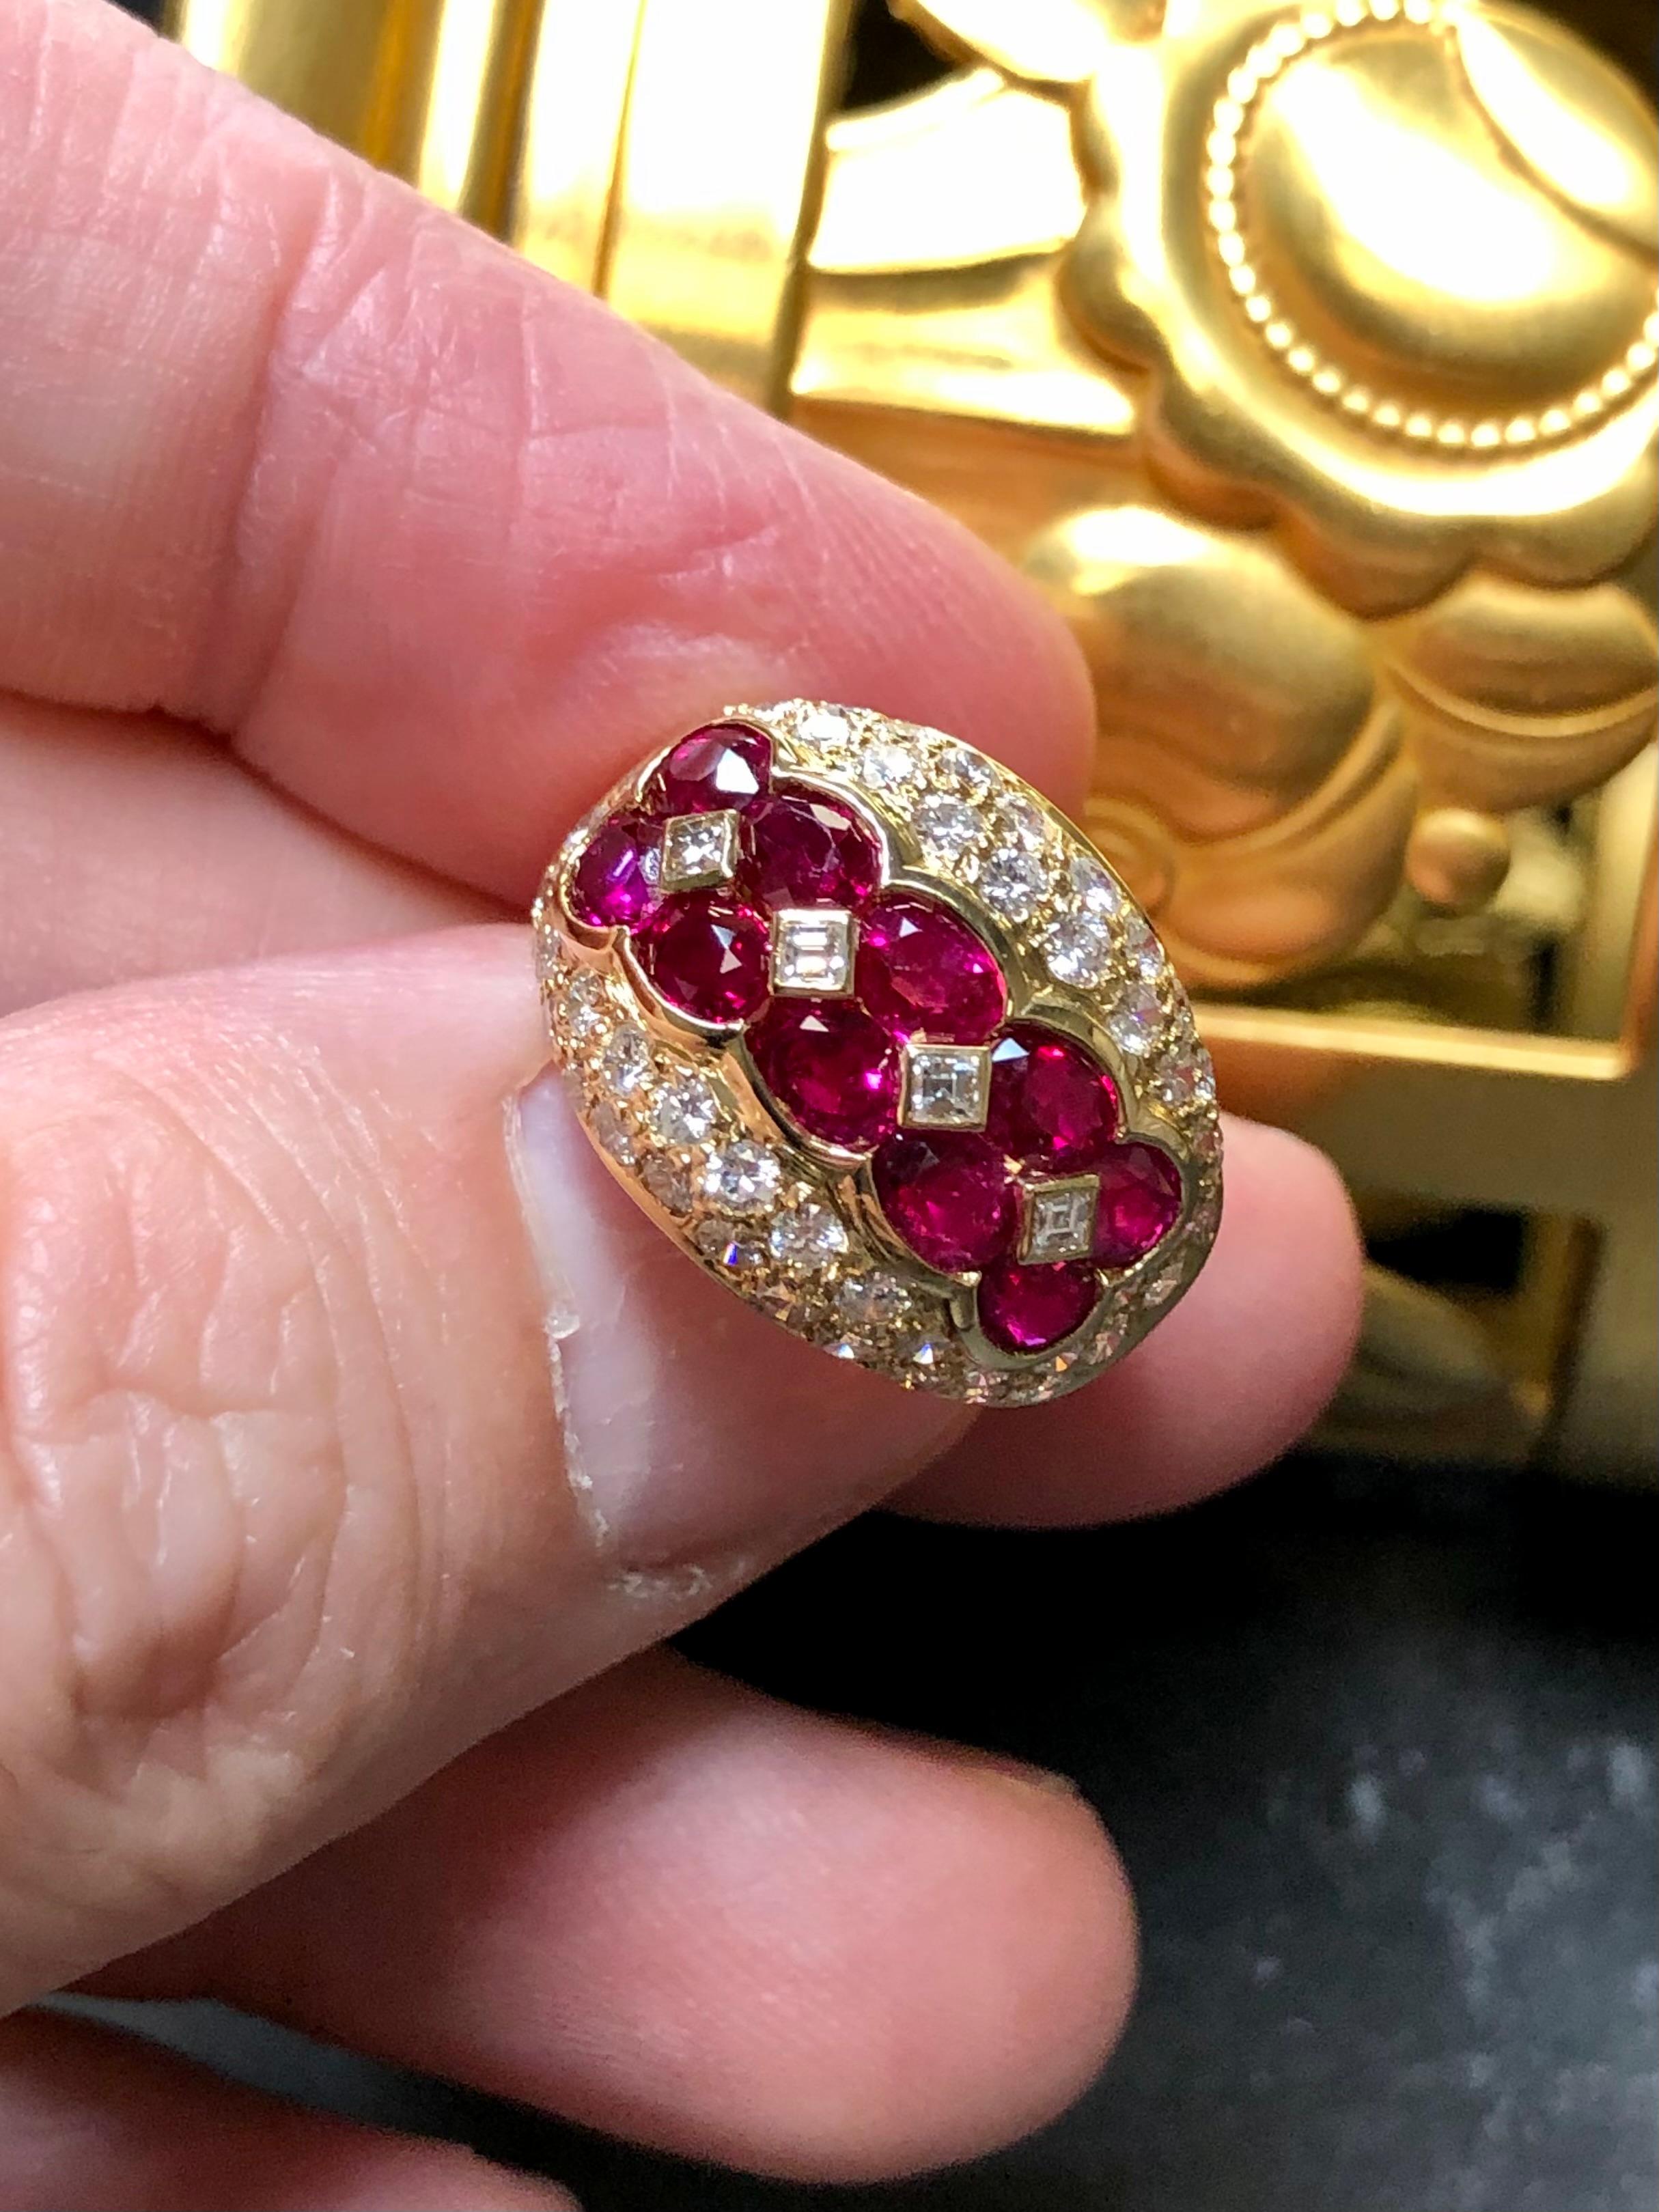 Estate 18K Yellow Gold Oval Ruby Pave Diamond Cocktail Ring 4.57cttw Sz 5.5 In Good Condition For Sale In Winter Springs, FL